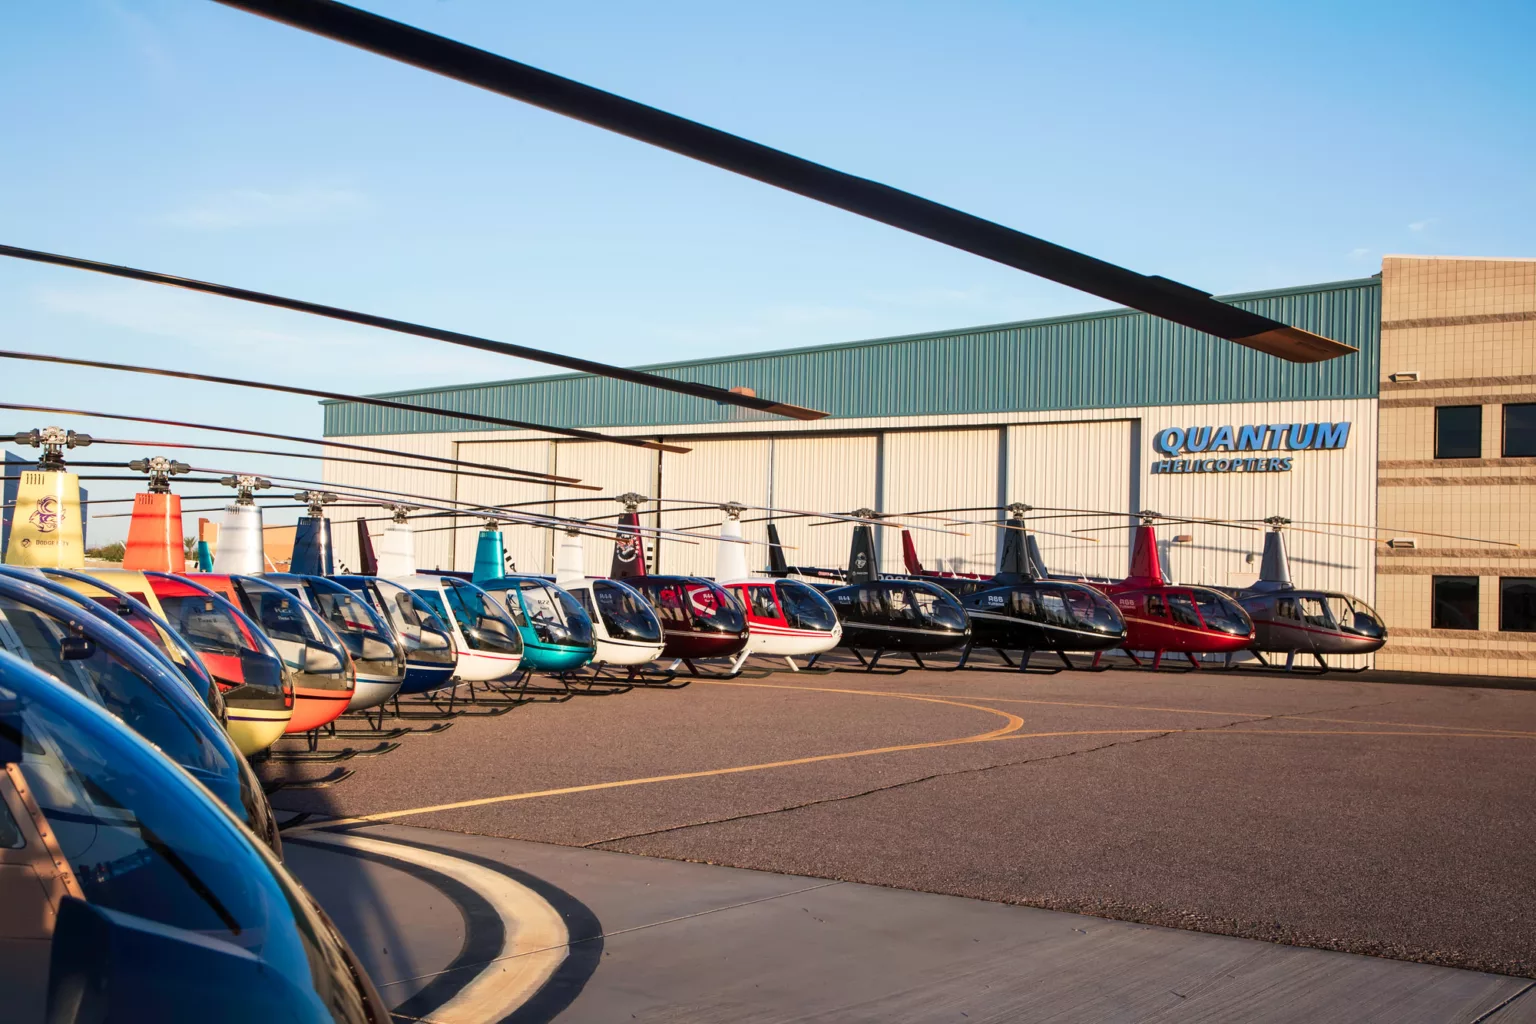 fleet of helicopters at Quantum Helicopters